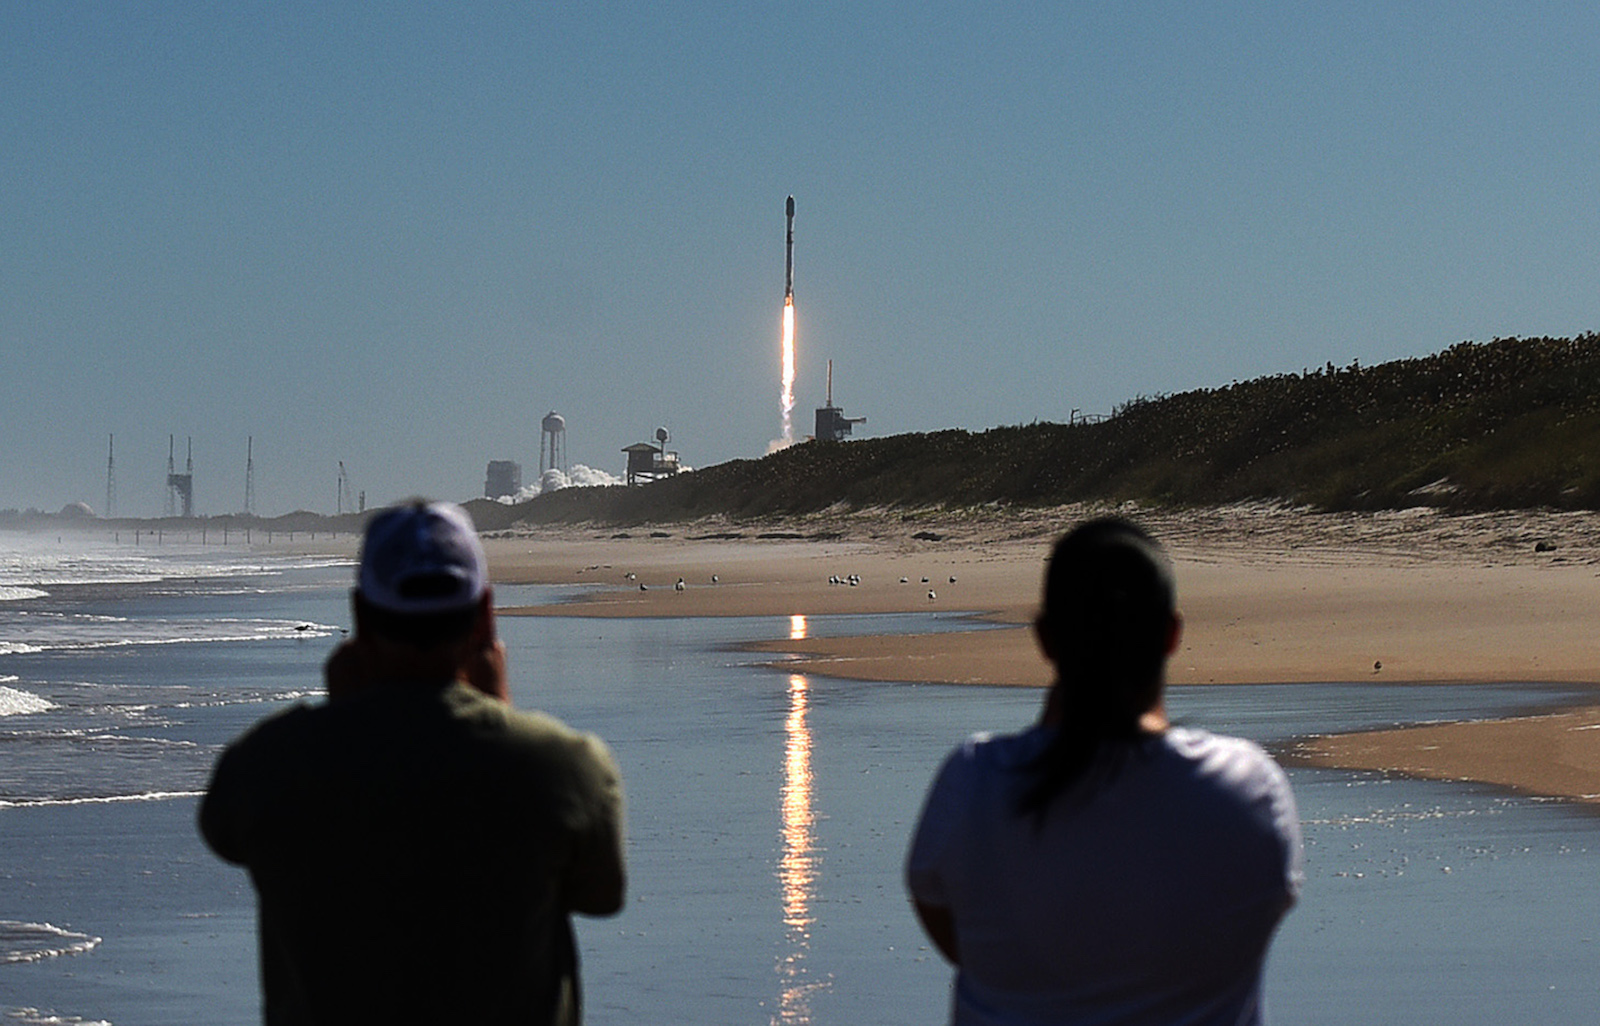 two people stand with their backs to the viewer watching a rocket take off over a seaside view